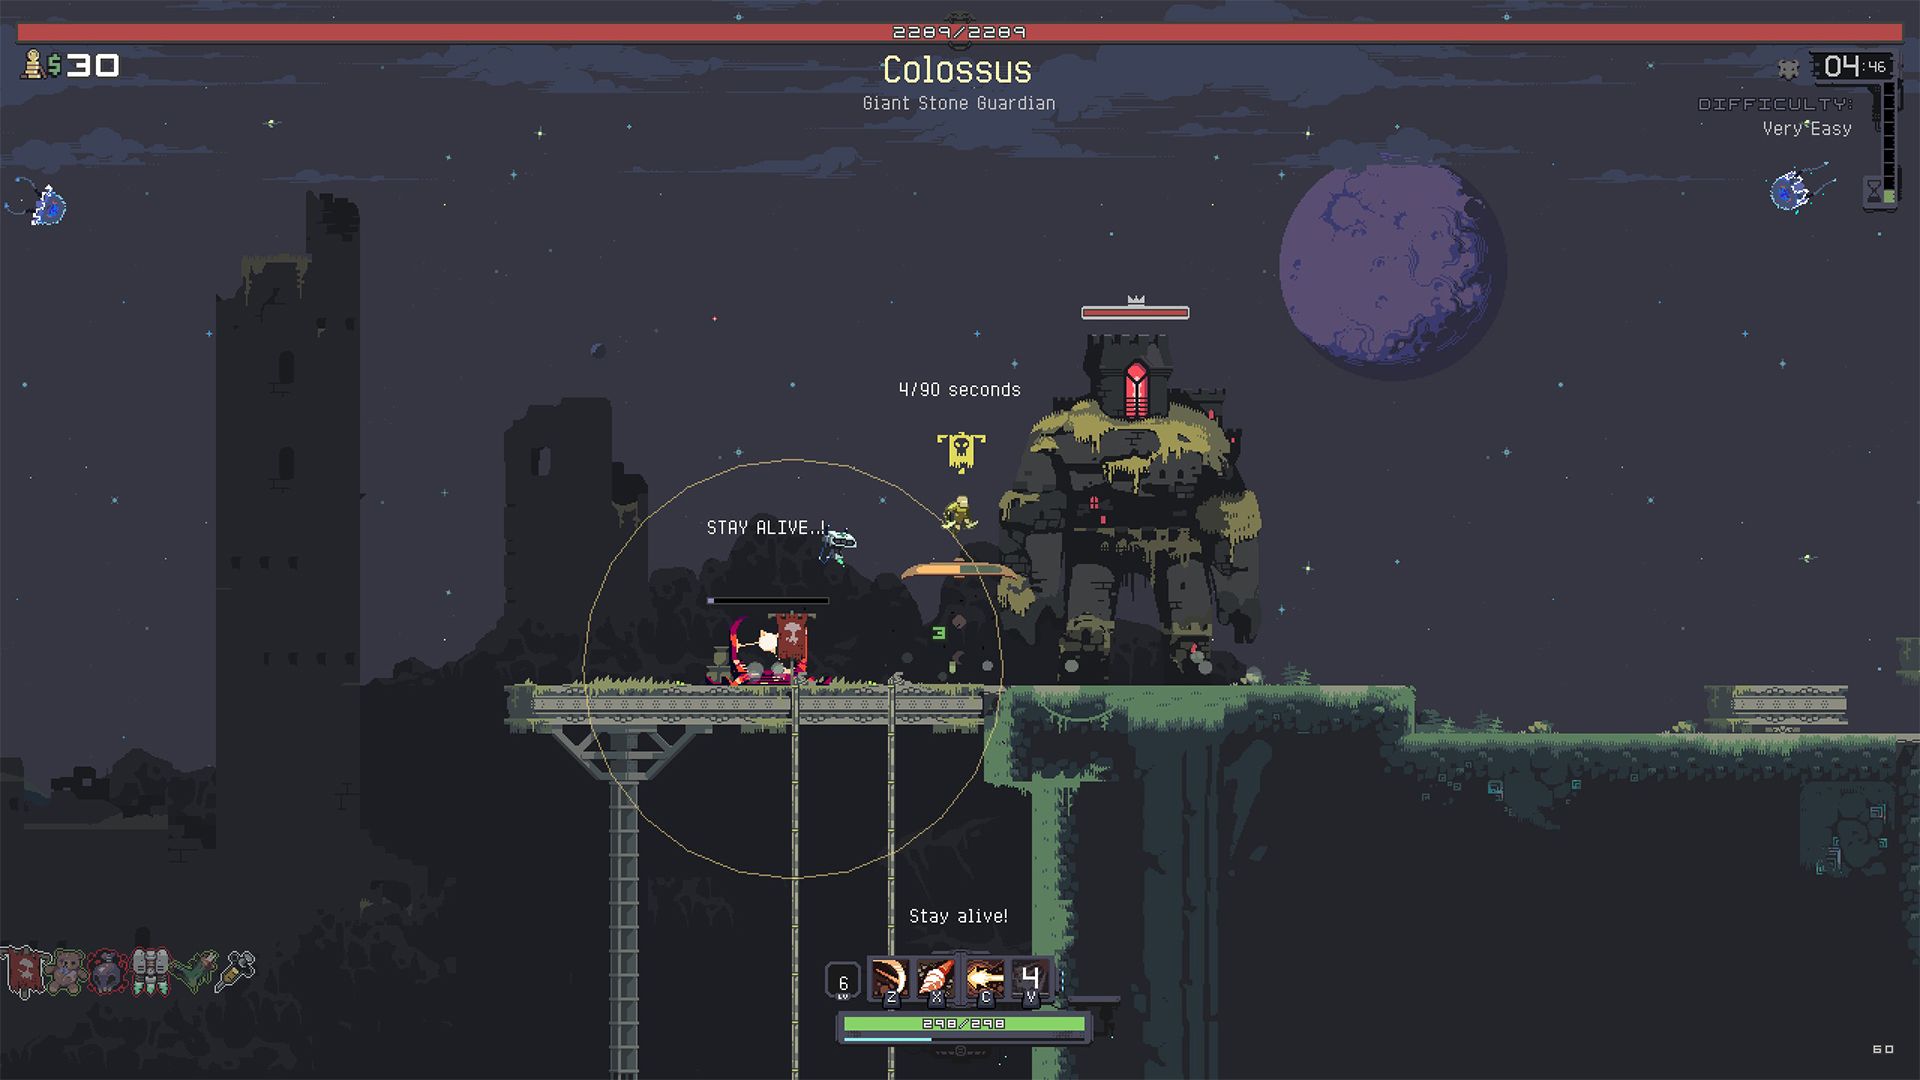 miner fighting the colossus